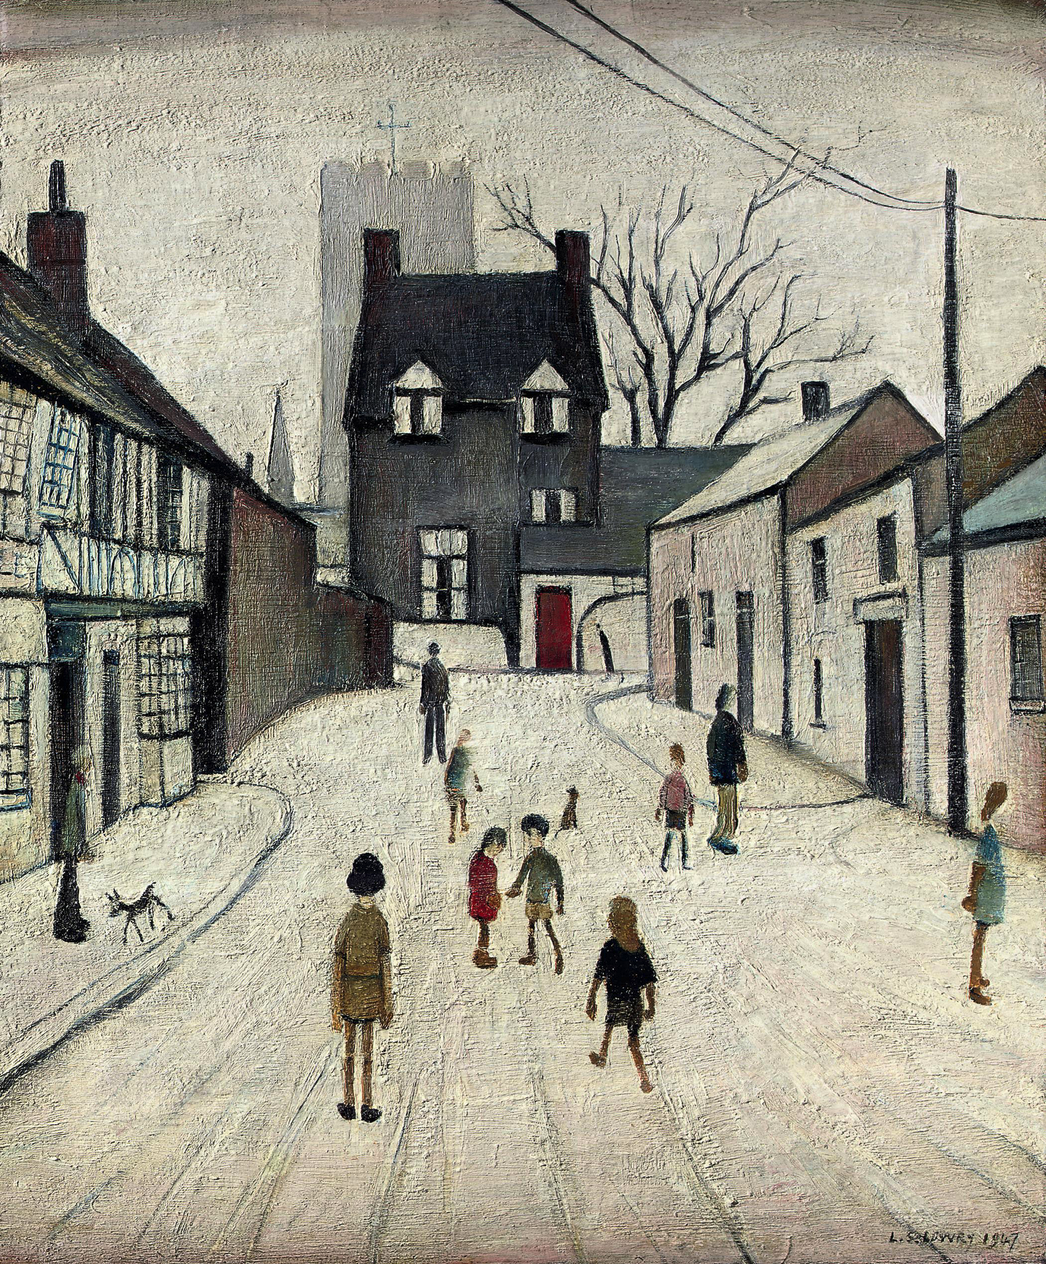 Street in Northleach (1947) by Laurence Stephen Lowry (1887 - 1976), English artist.